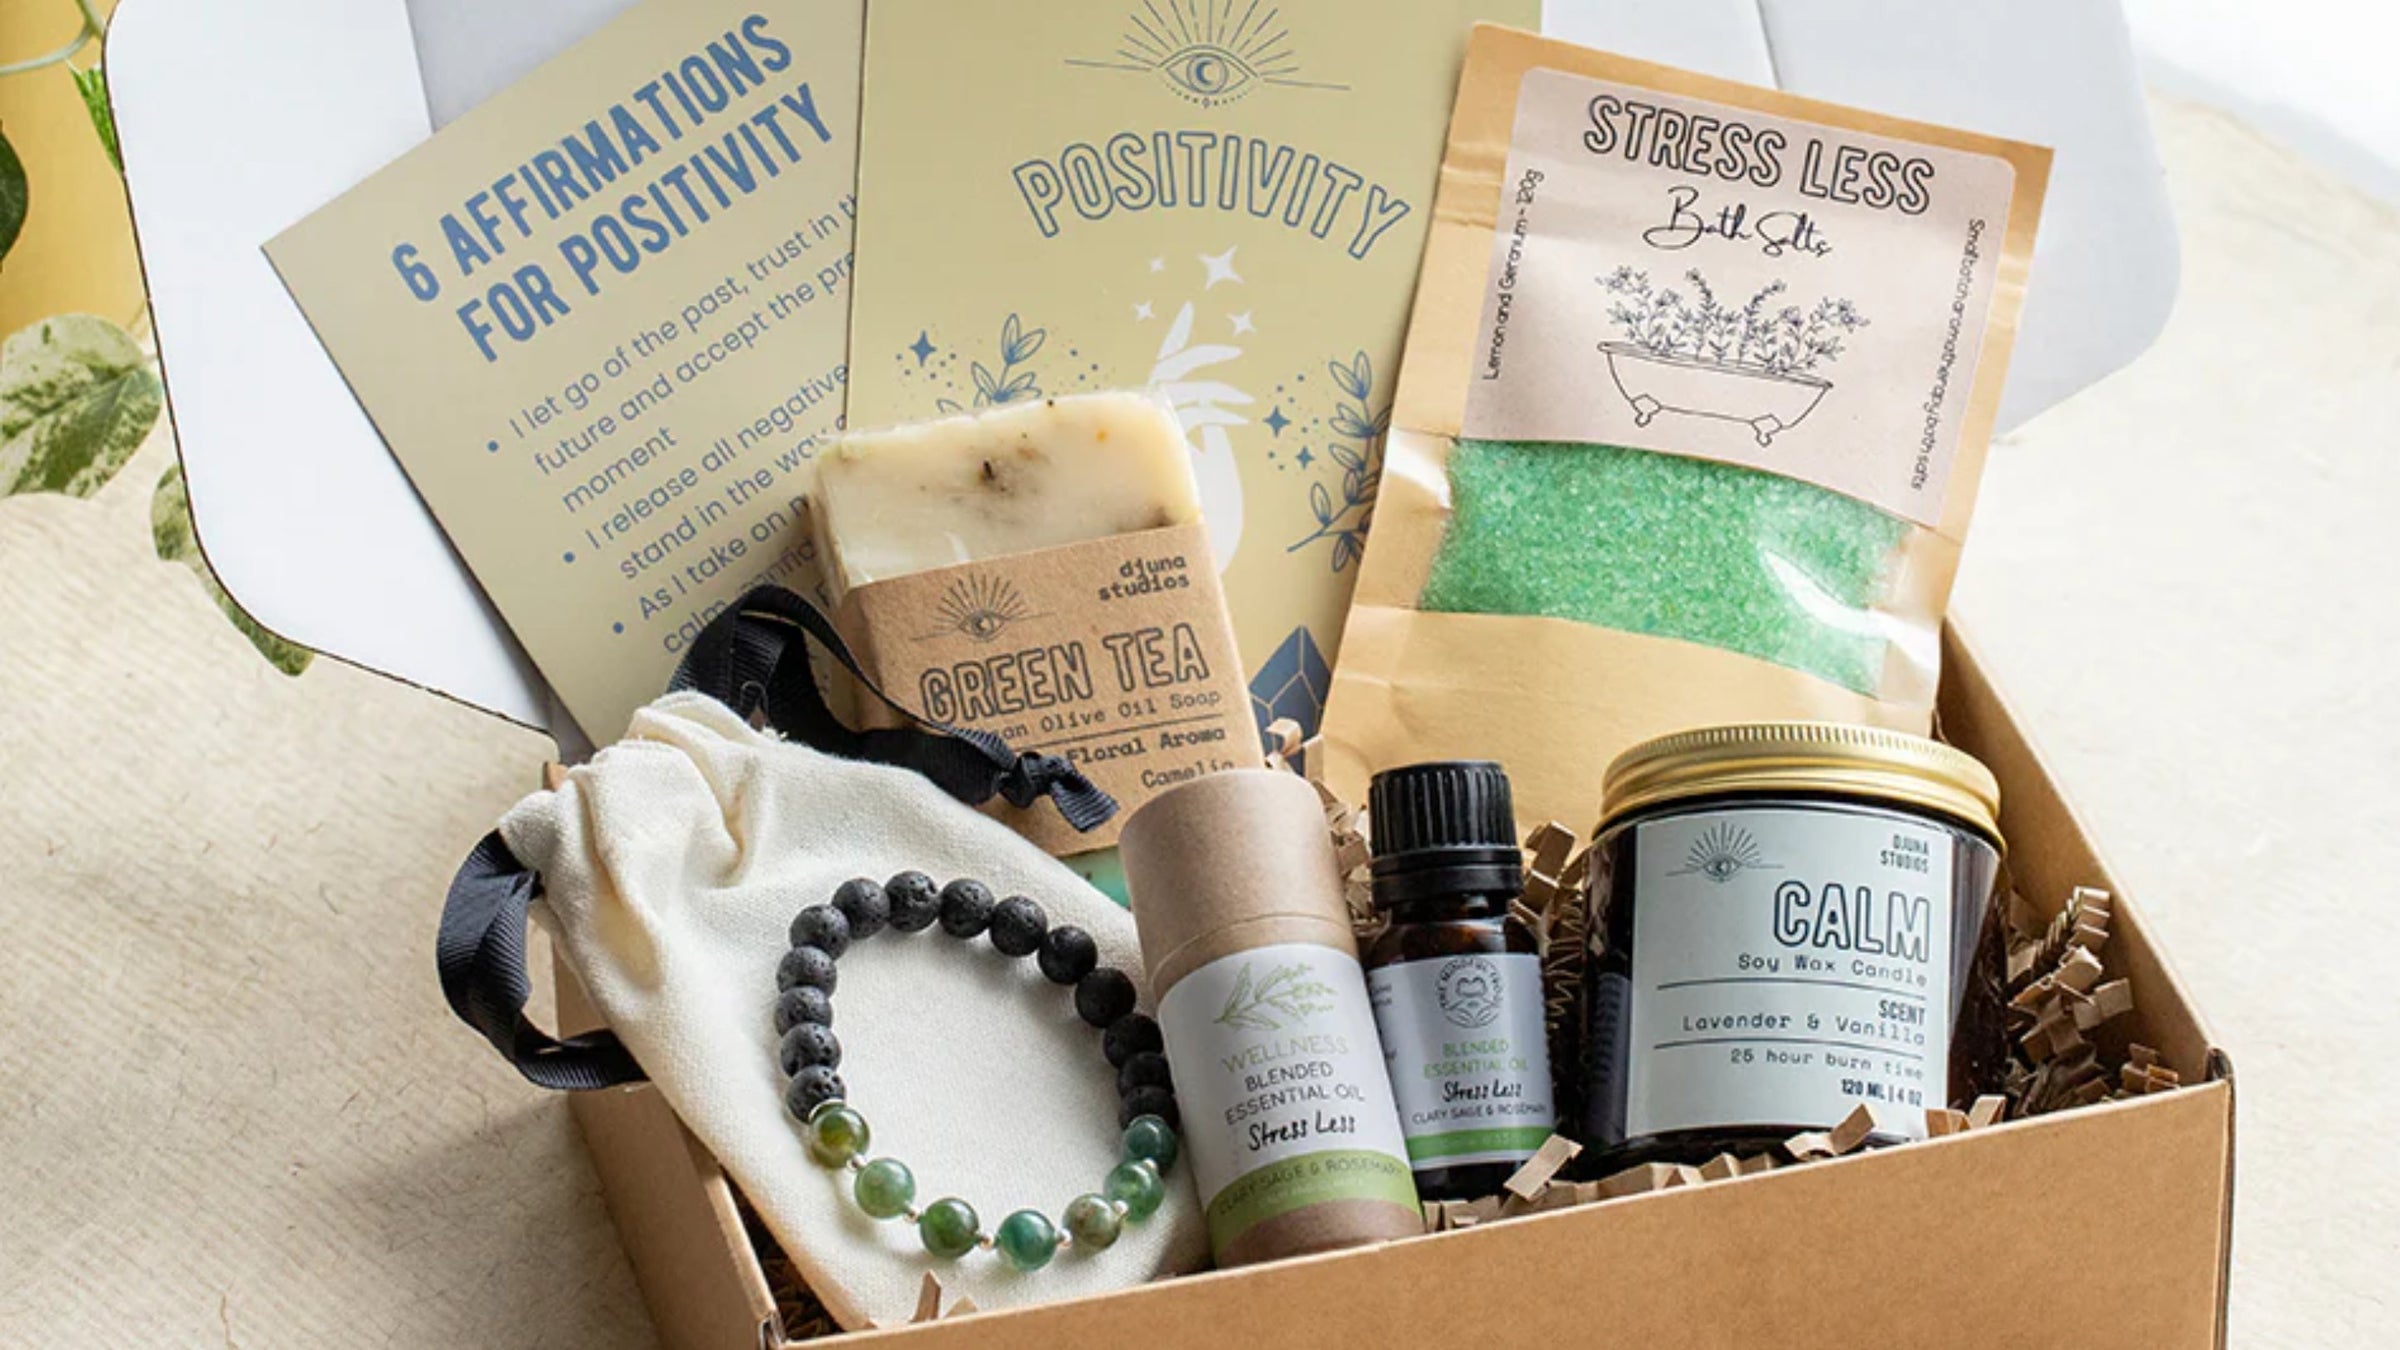 Self-love wellbeing gift boxes for yourself or friends and family filled with pampering items like candles and bath salts...